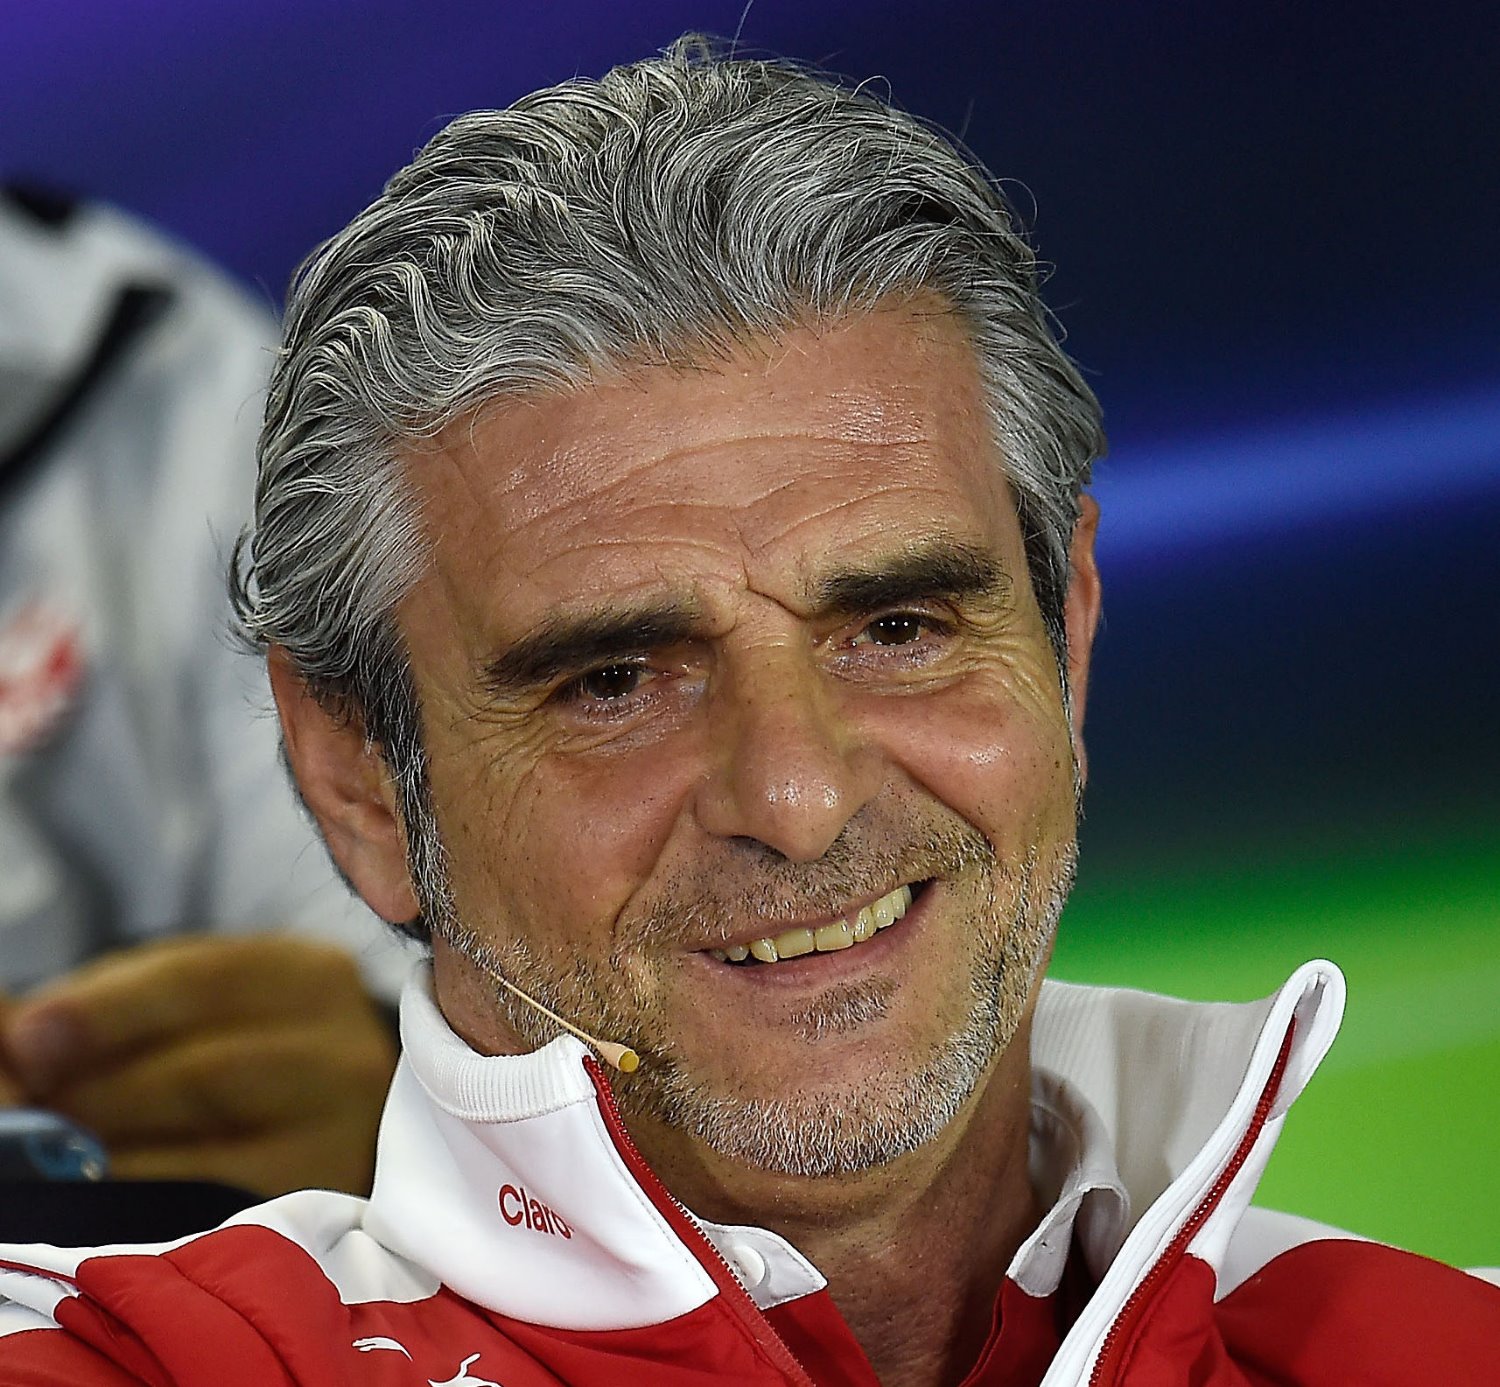 Arrivabene chuckles at reports